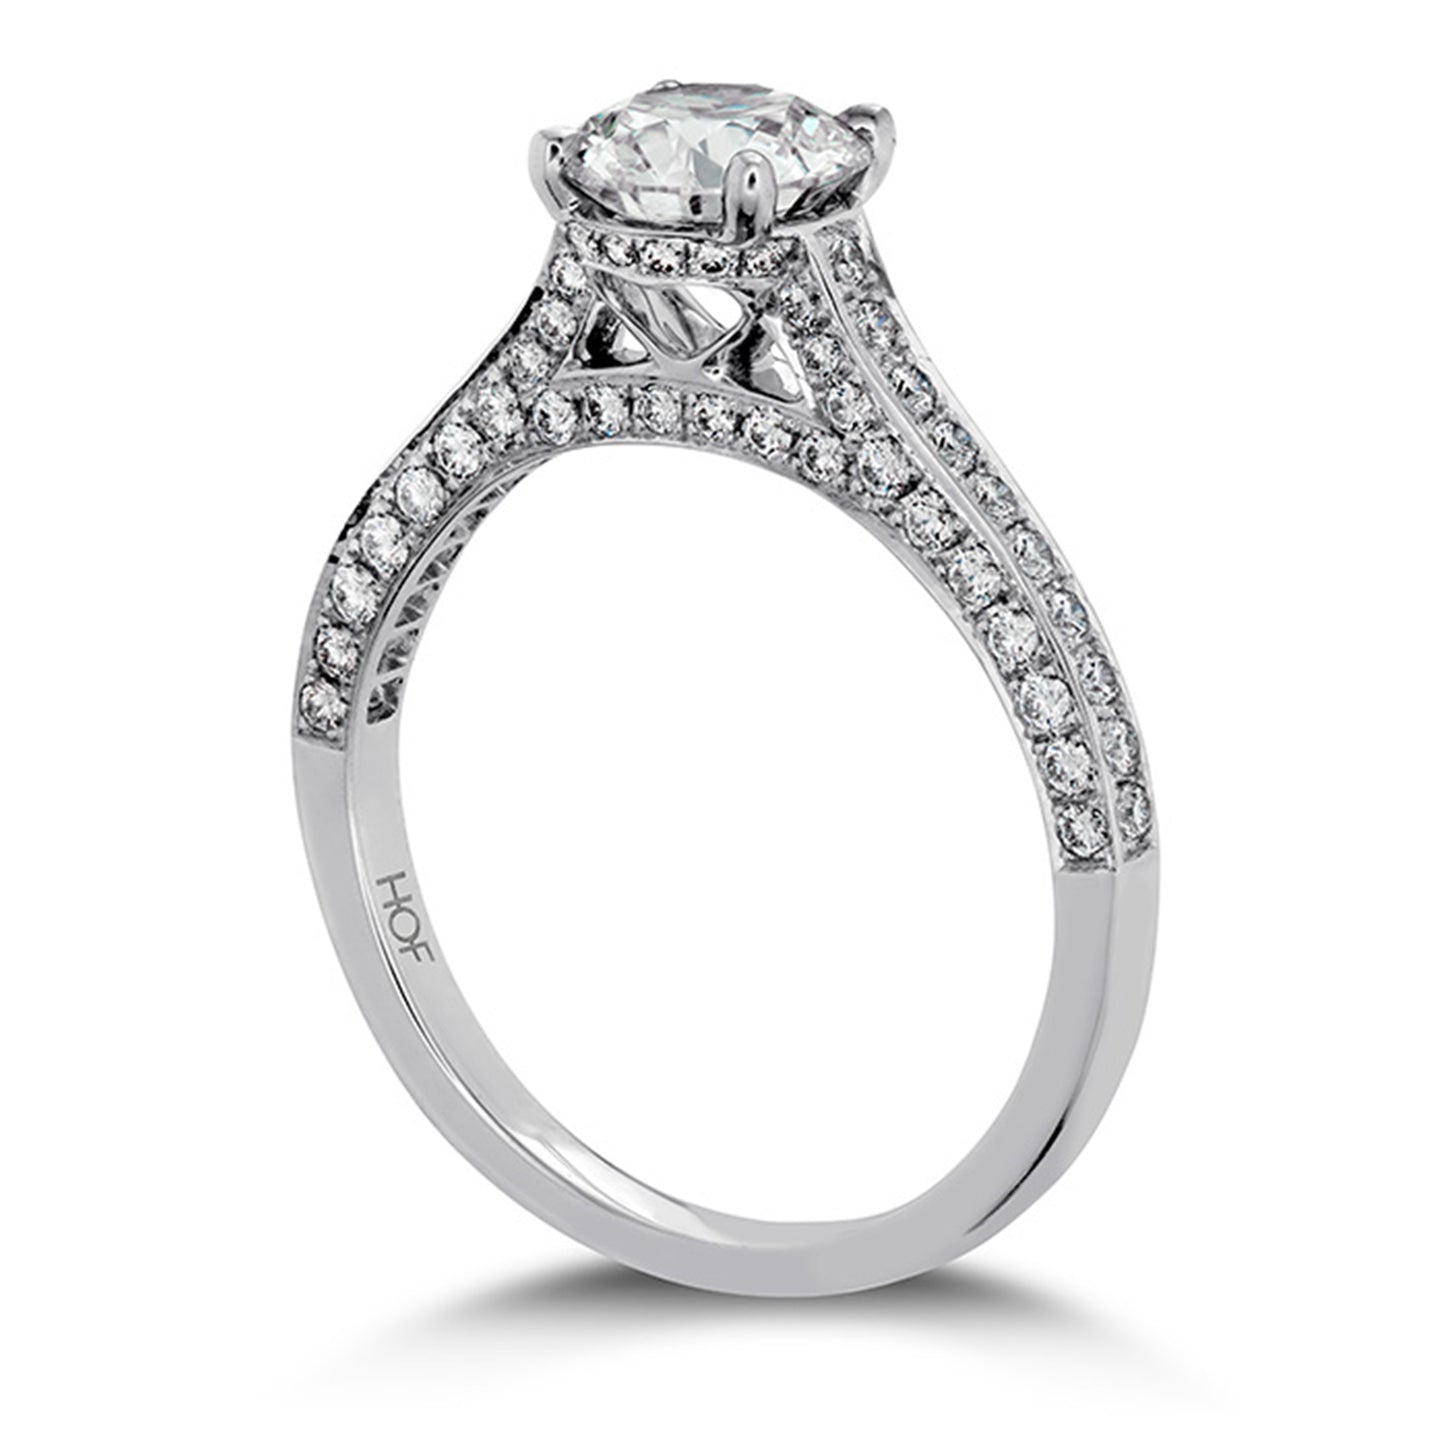 ILLUSTRIOUS HOF ENGAGEMENT RING WITH DIAMOND INTENSIVE BAND UU544